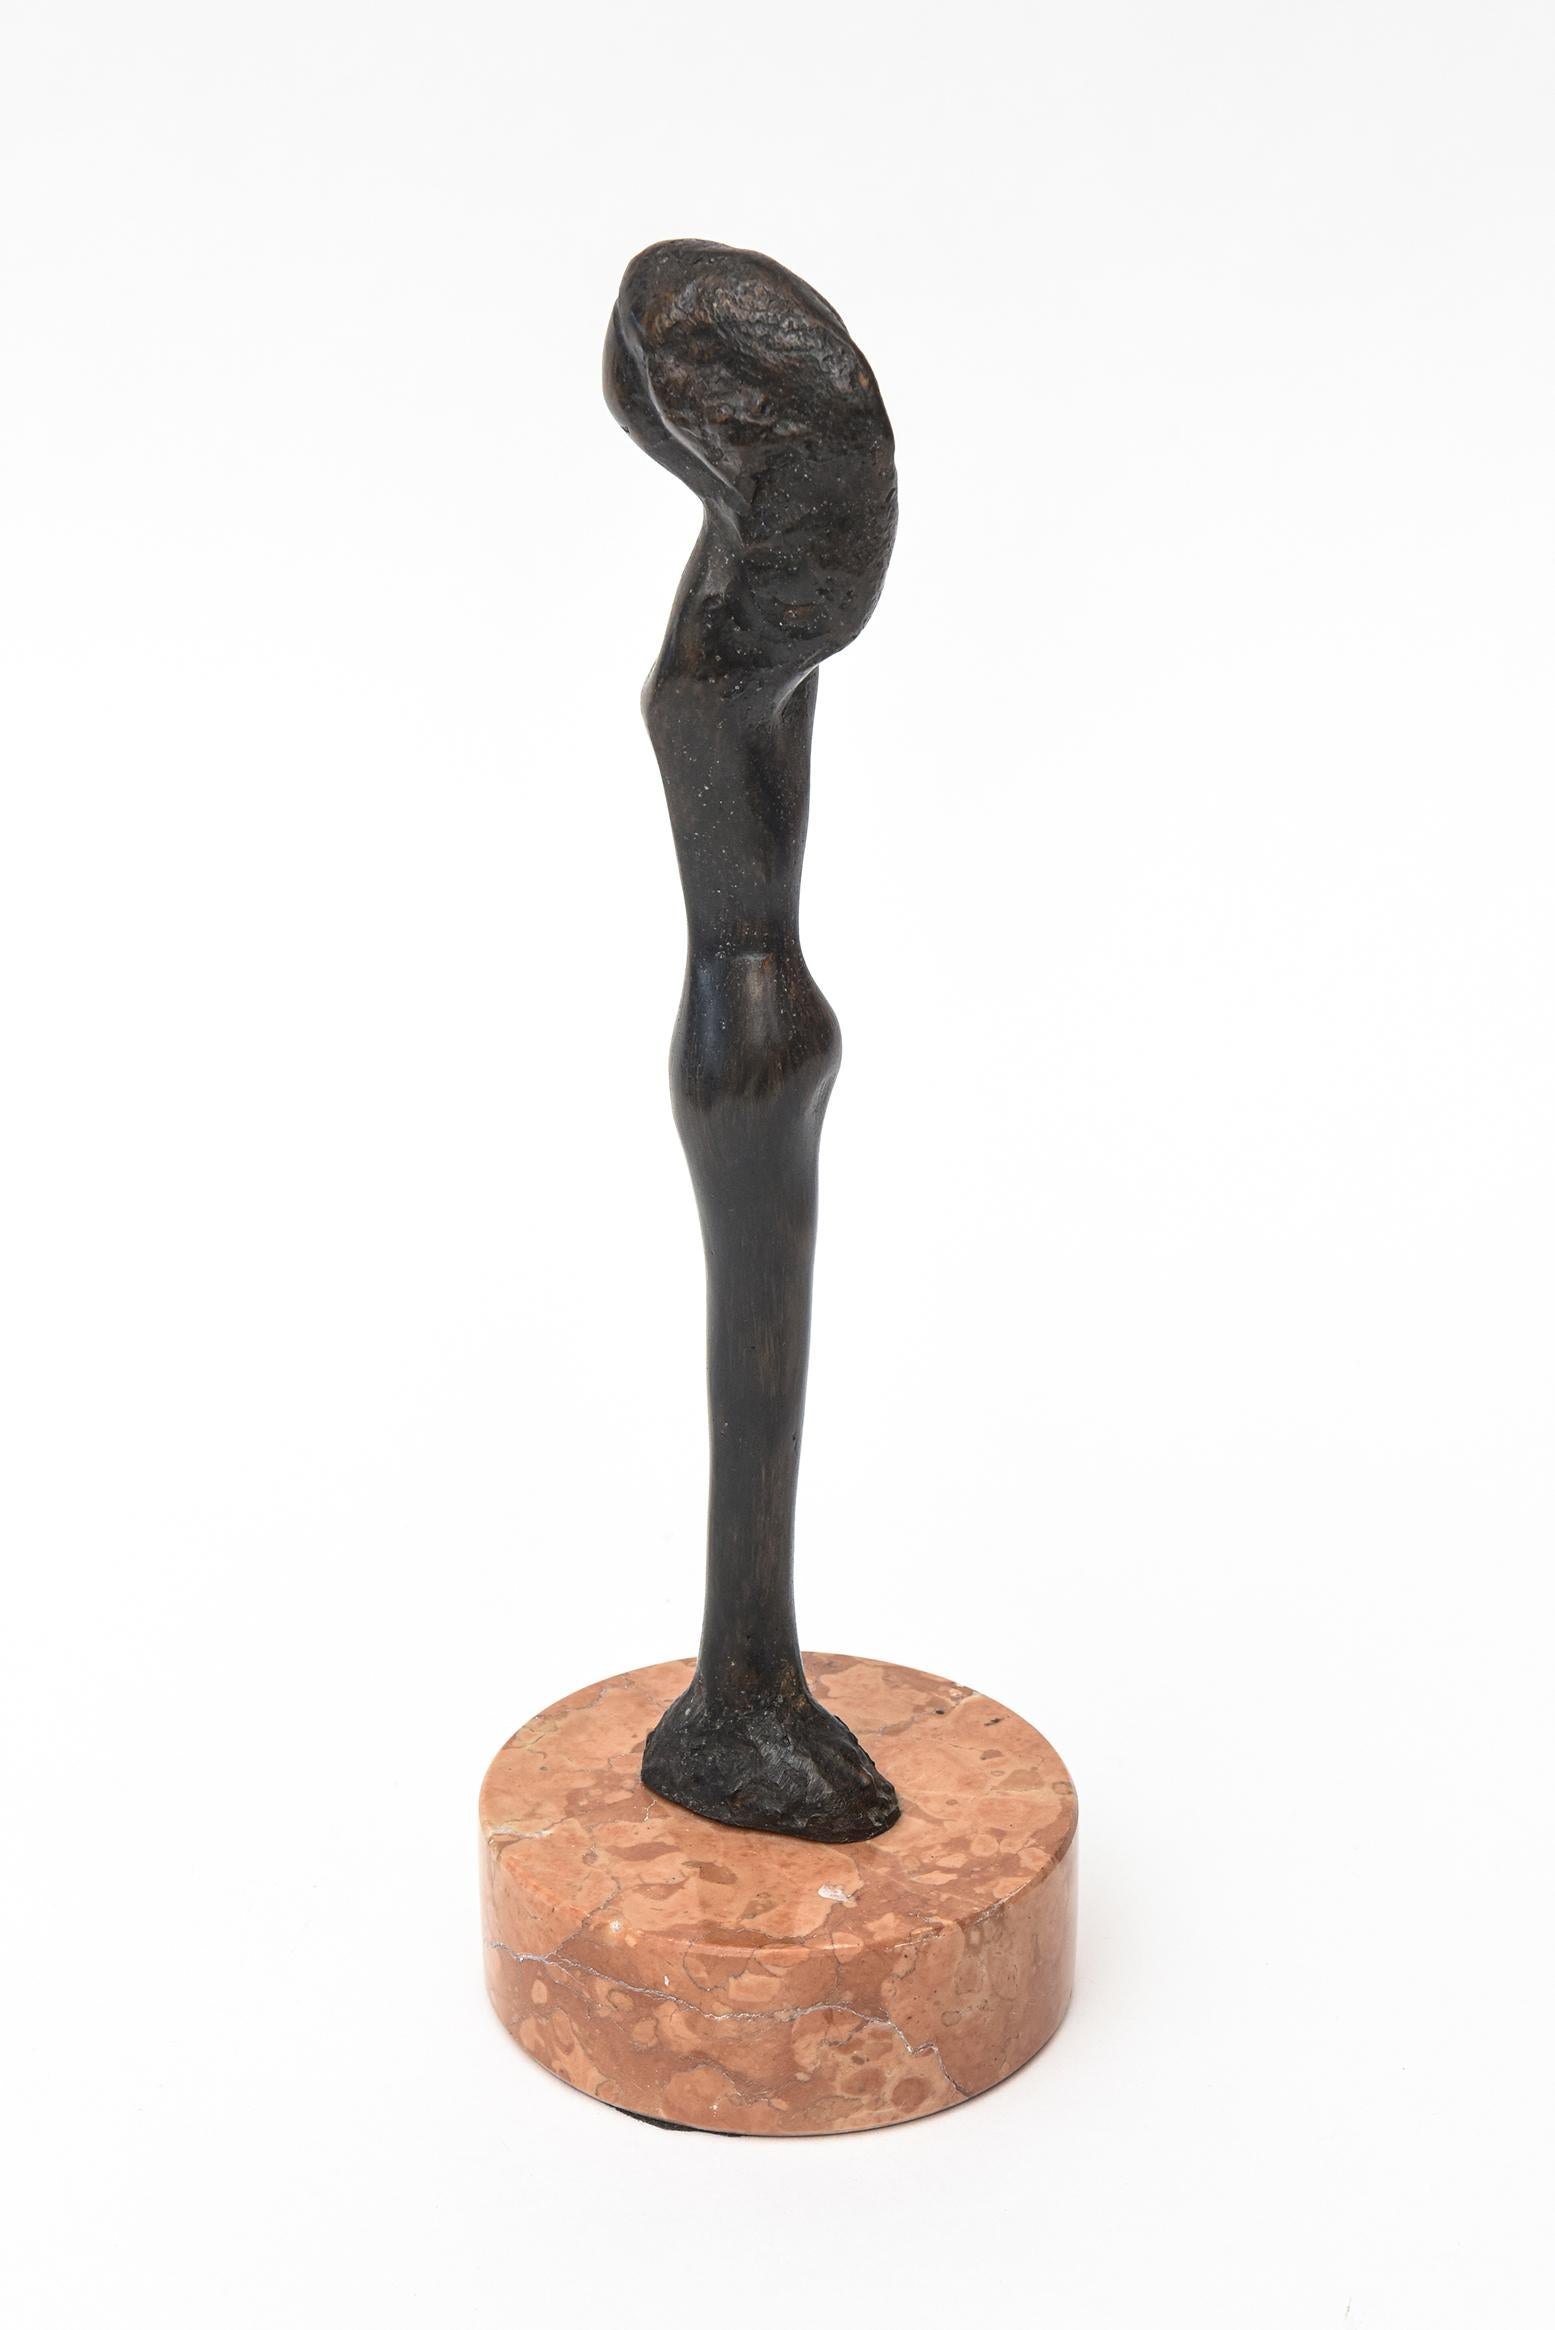 This sensual abstract small bronze Mid-Century Modern bronze sculpture sits on its original marble base. It is signed but not legible even with a macro lens. It is of a female abstracted form. The color of the orange veined original marble is a